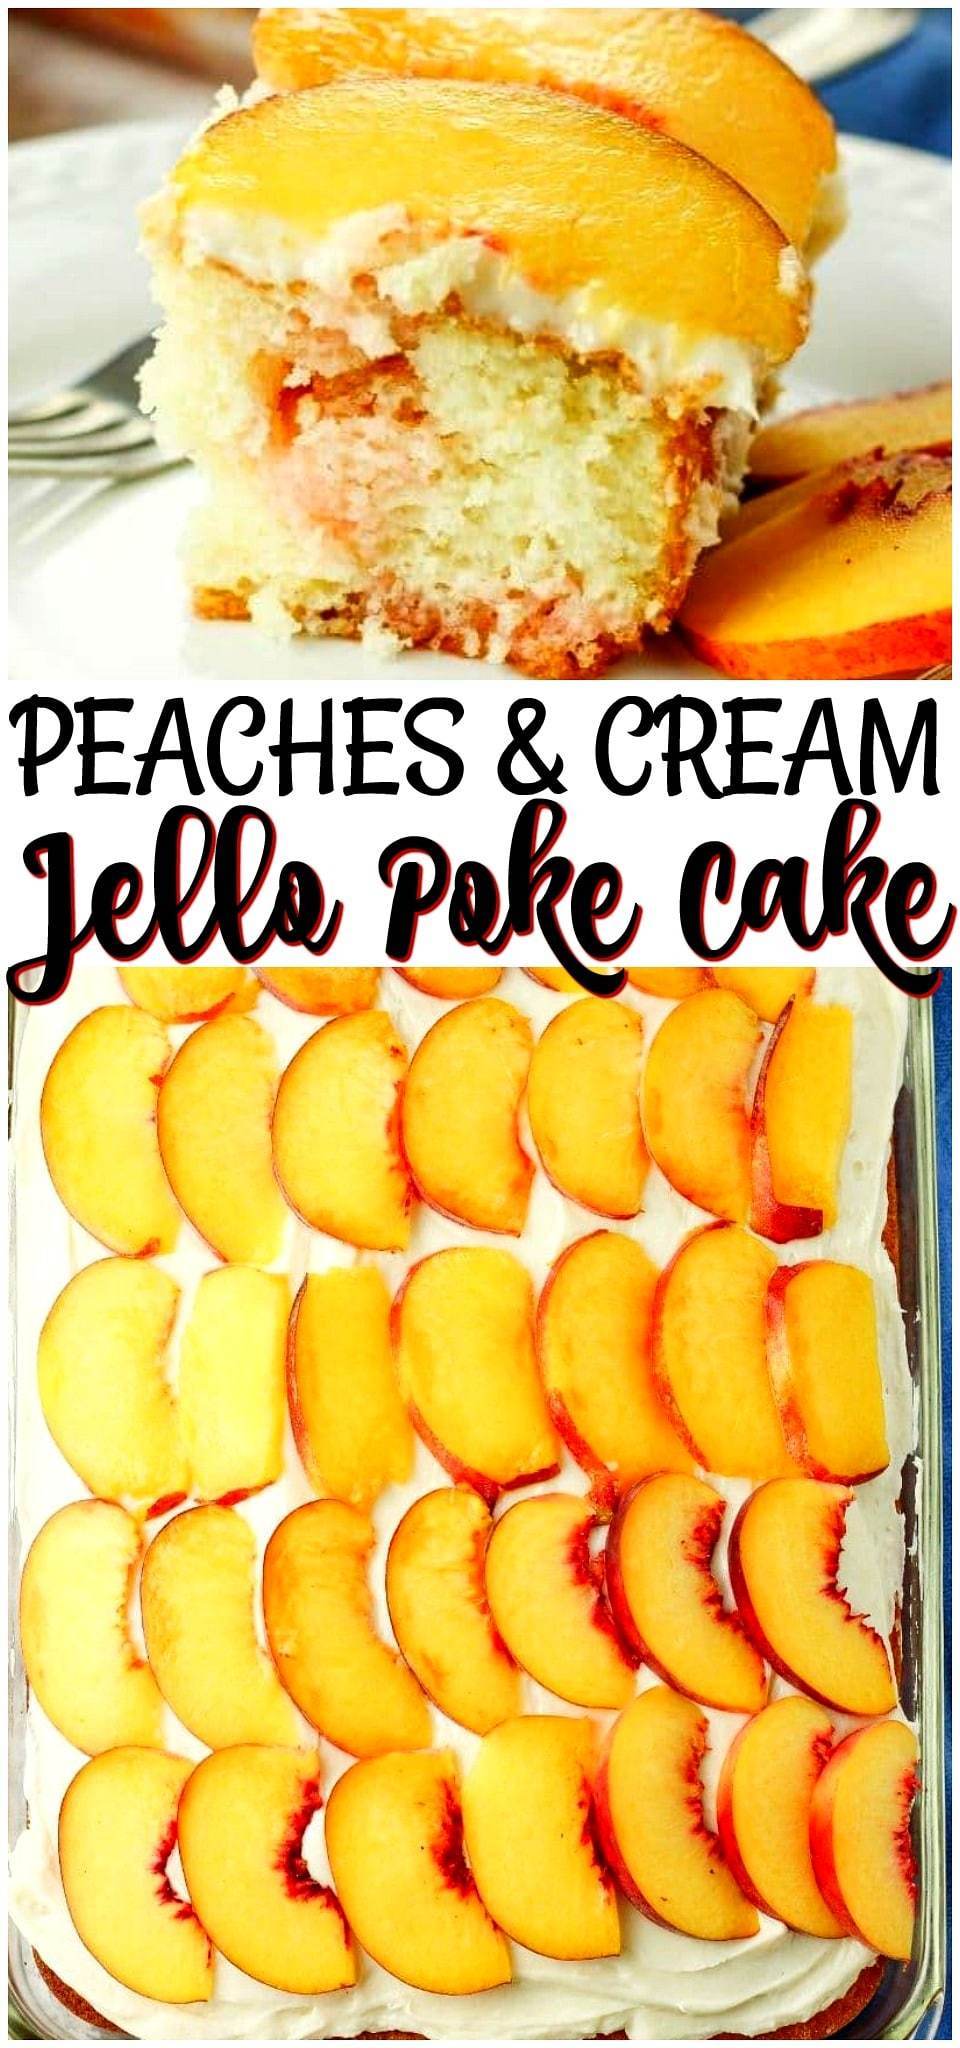 Peaches and Cream Poke Cake filled with sweet peach flavor & topped with cream cheese frosting and fresh peaches. Easy jello poke cake recipe for peach lovers! 